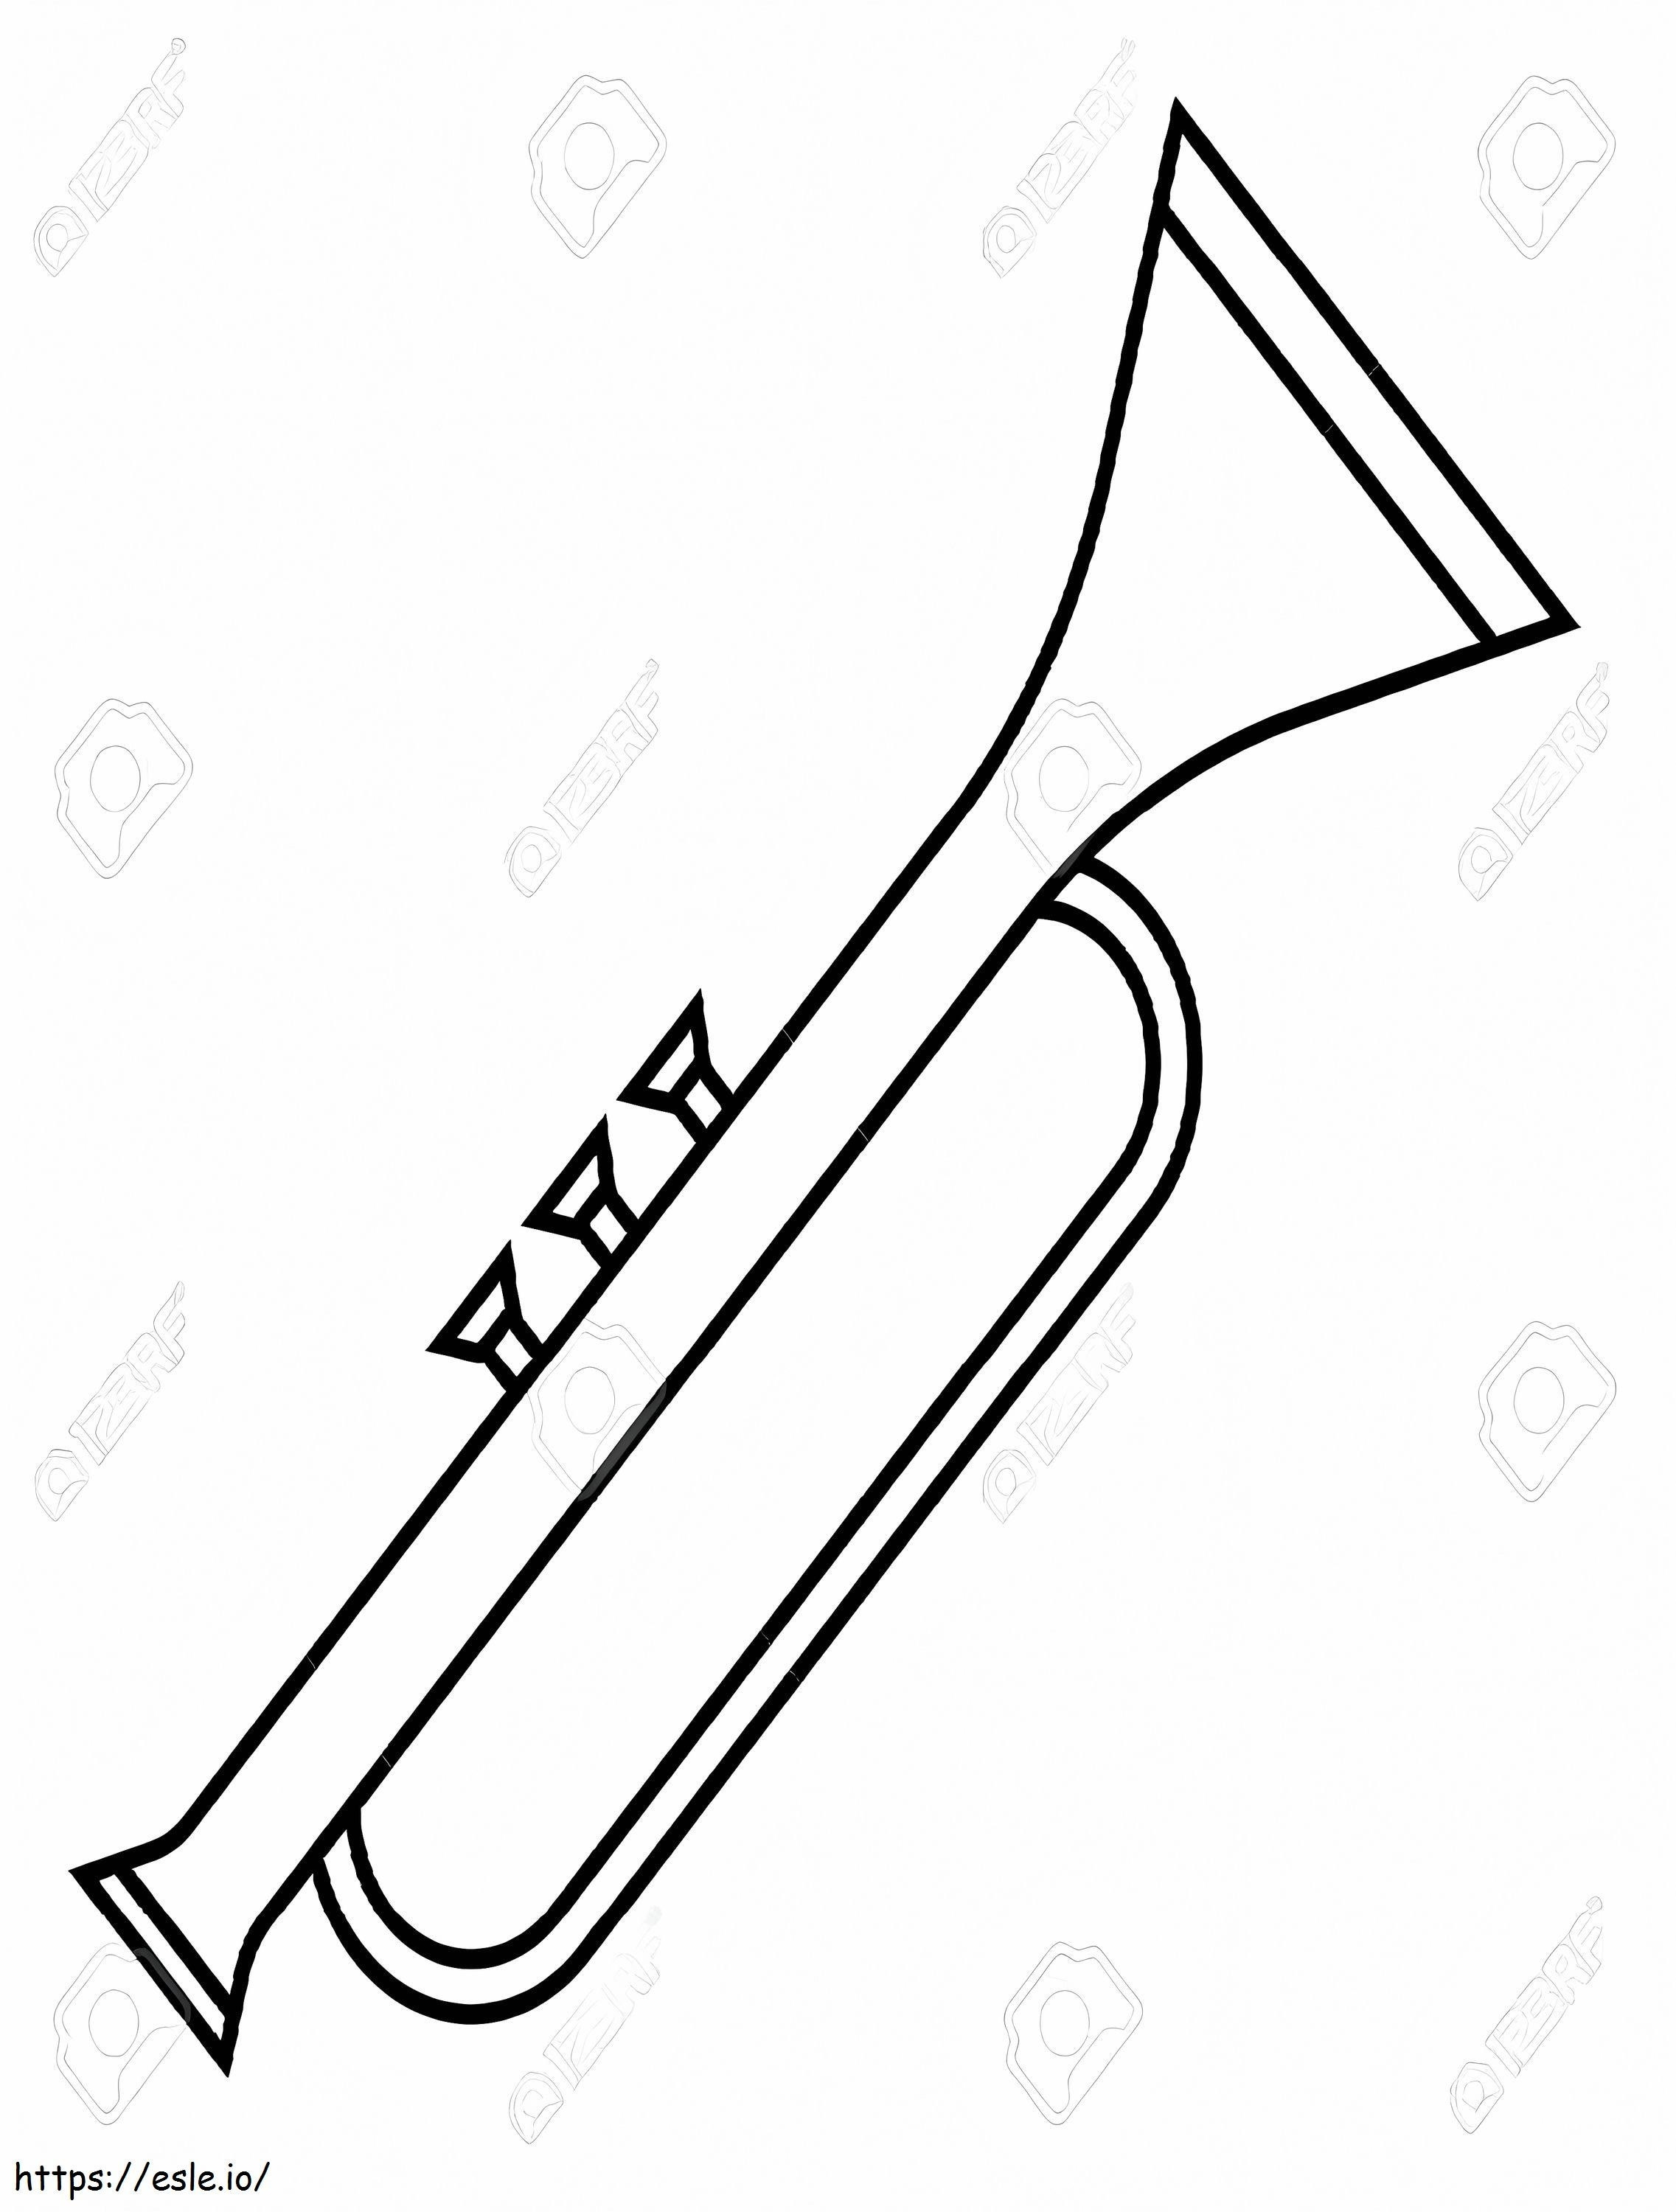 Single Trumpet 2 coloring page